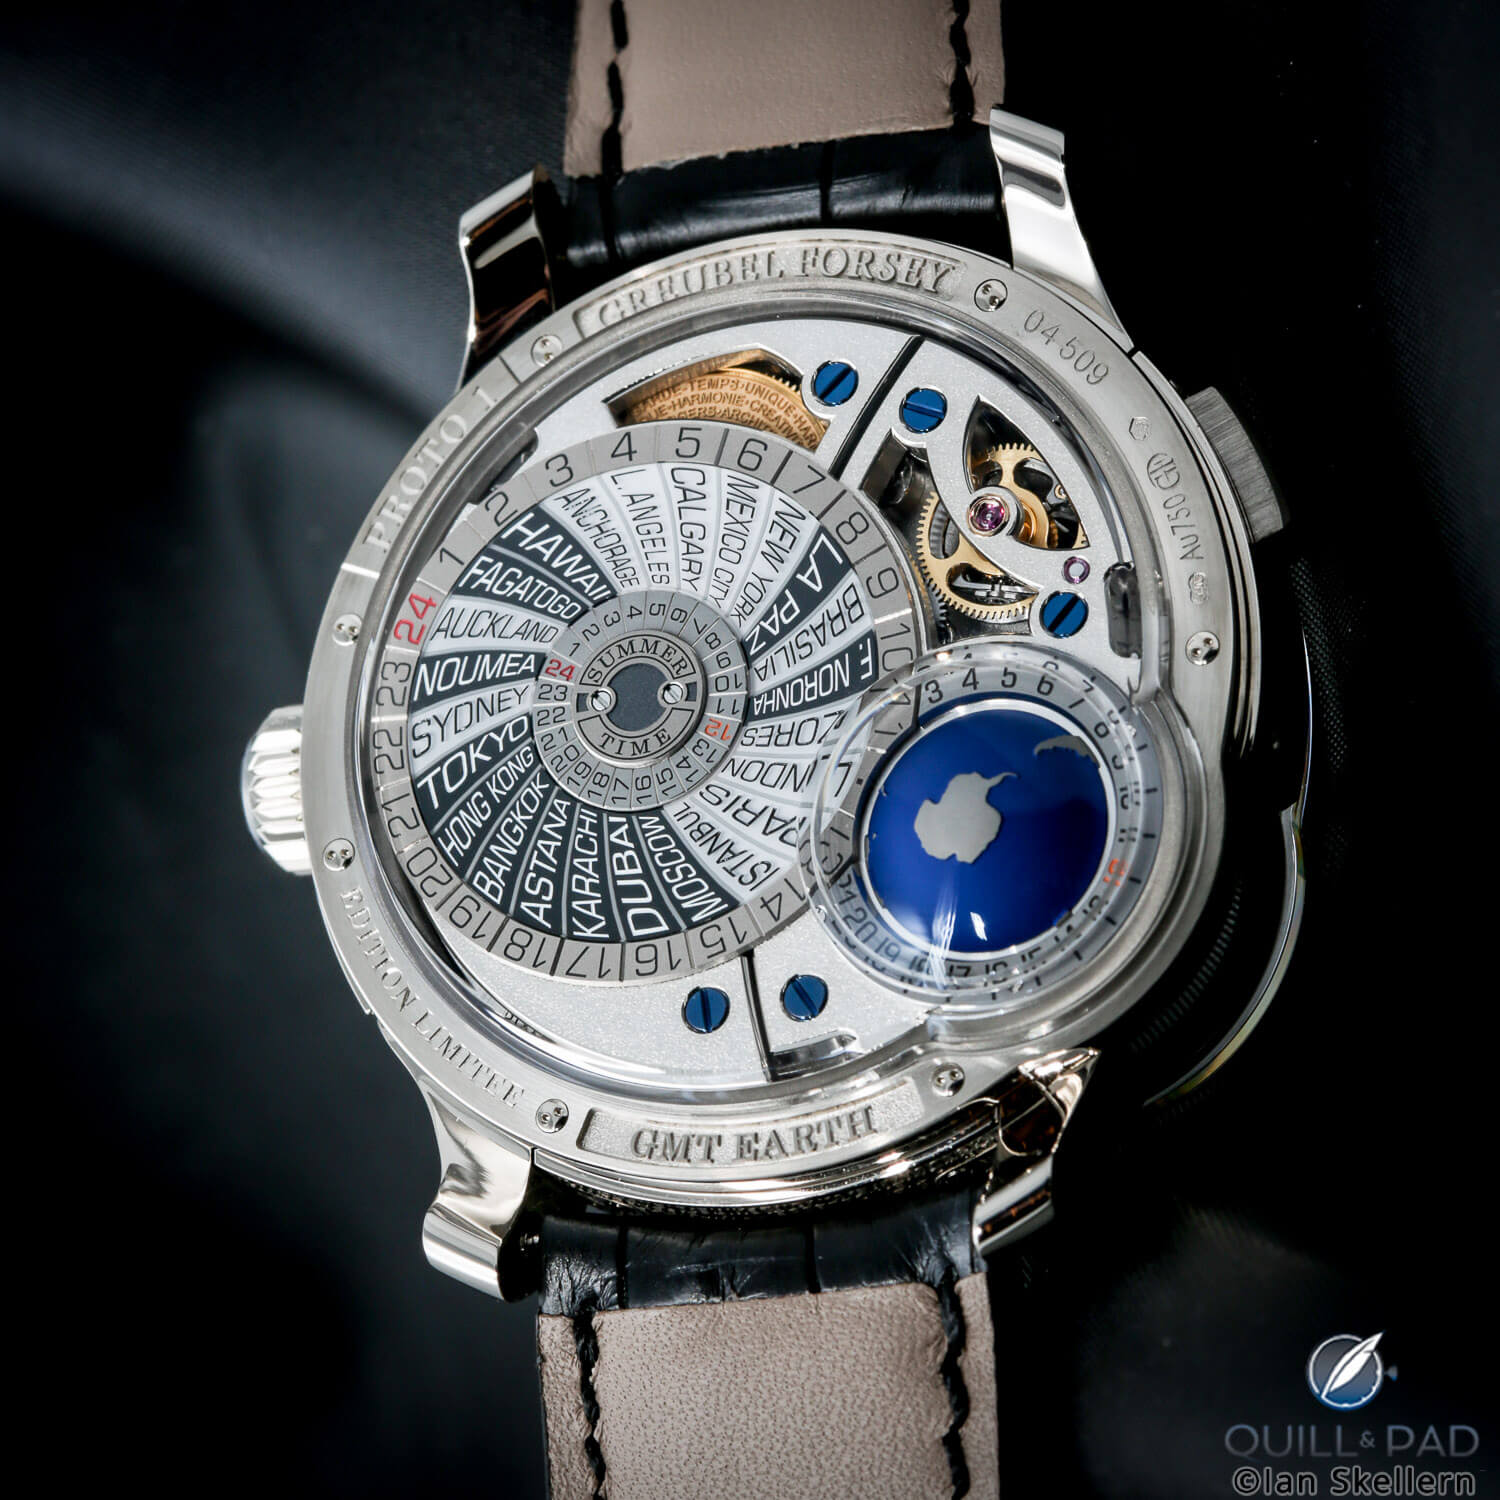 24 time zones on the back of the Greubel Forsey GMT Earth